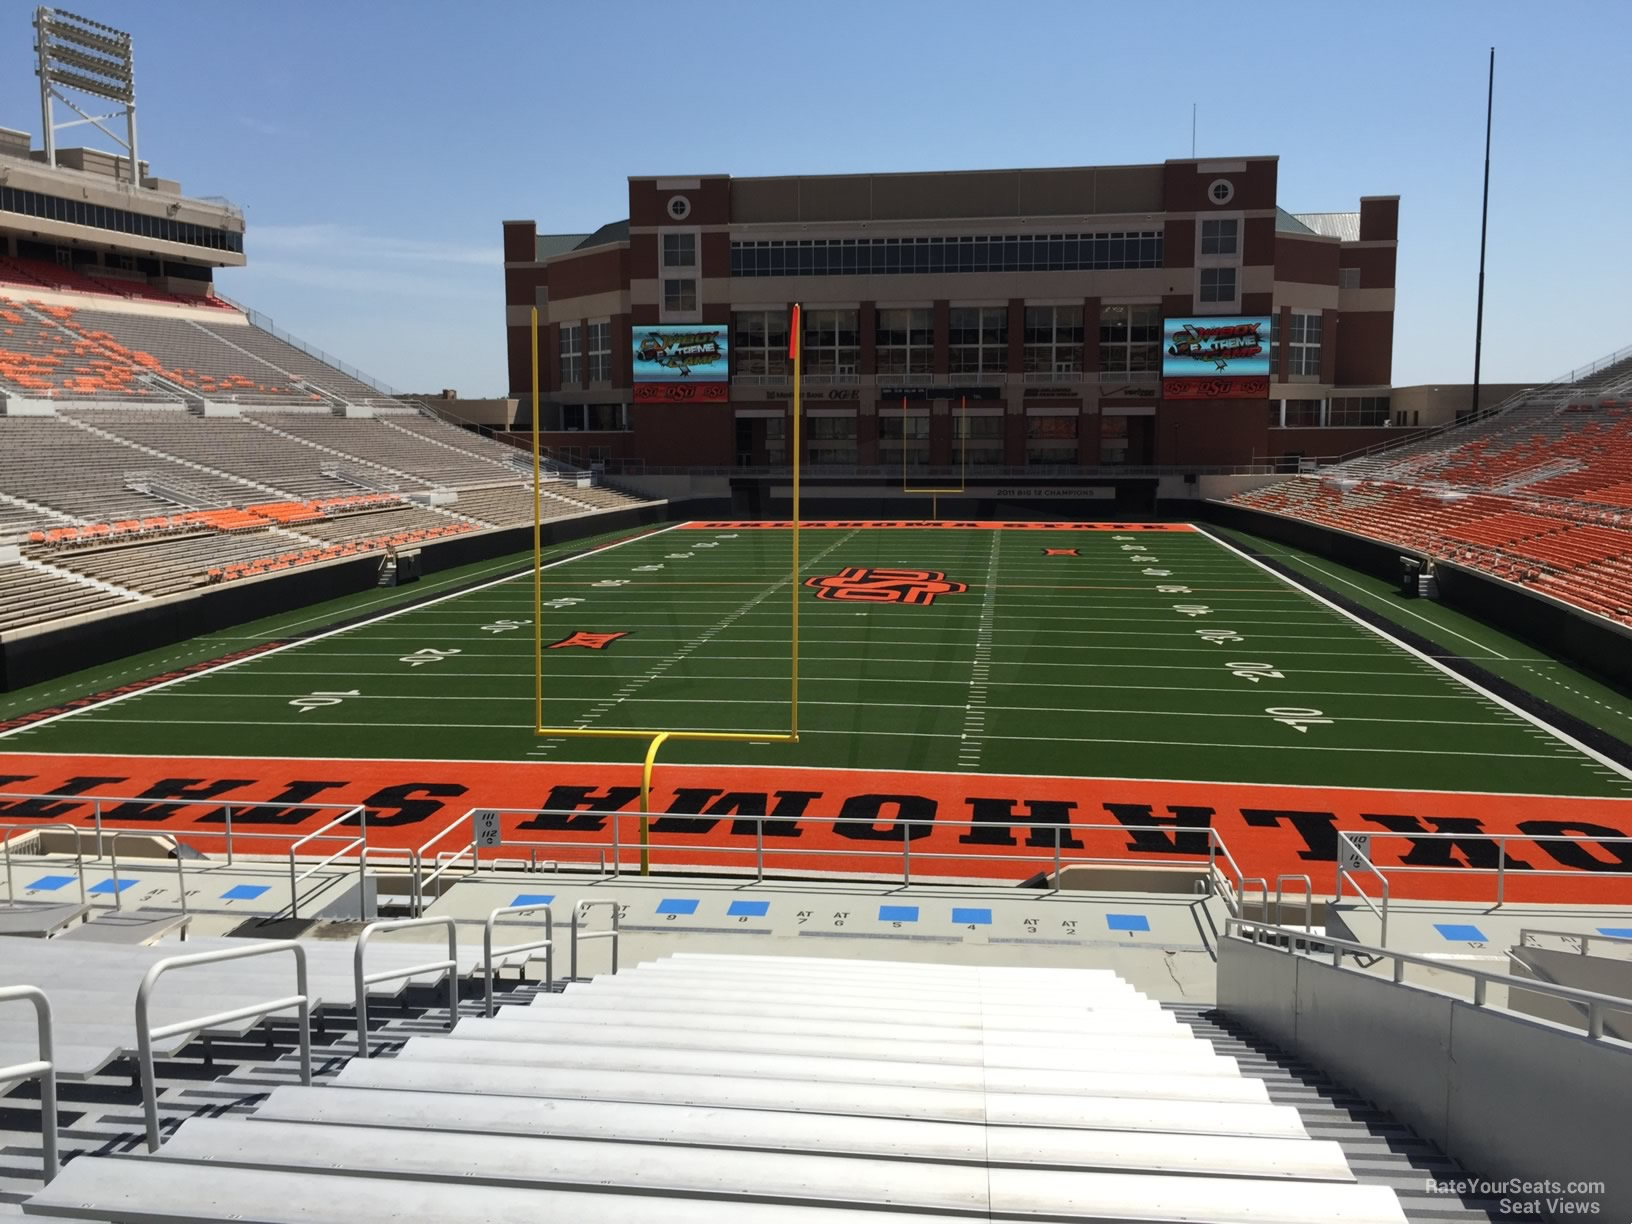 section 215, row 20 seat view  - boone pickens stadium